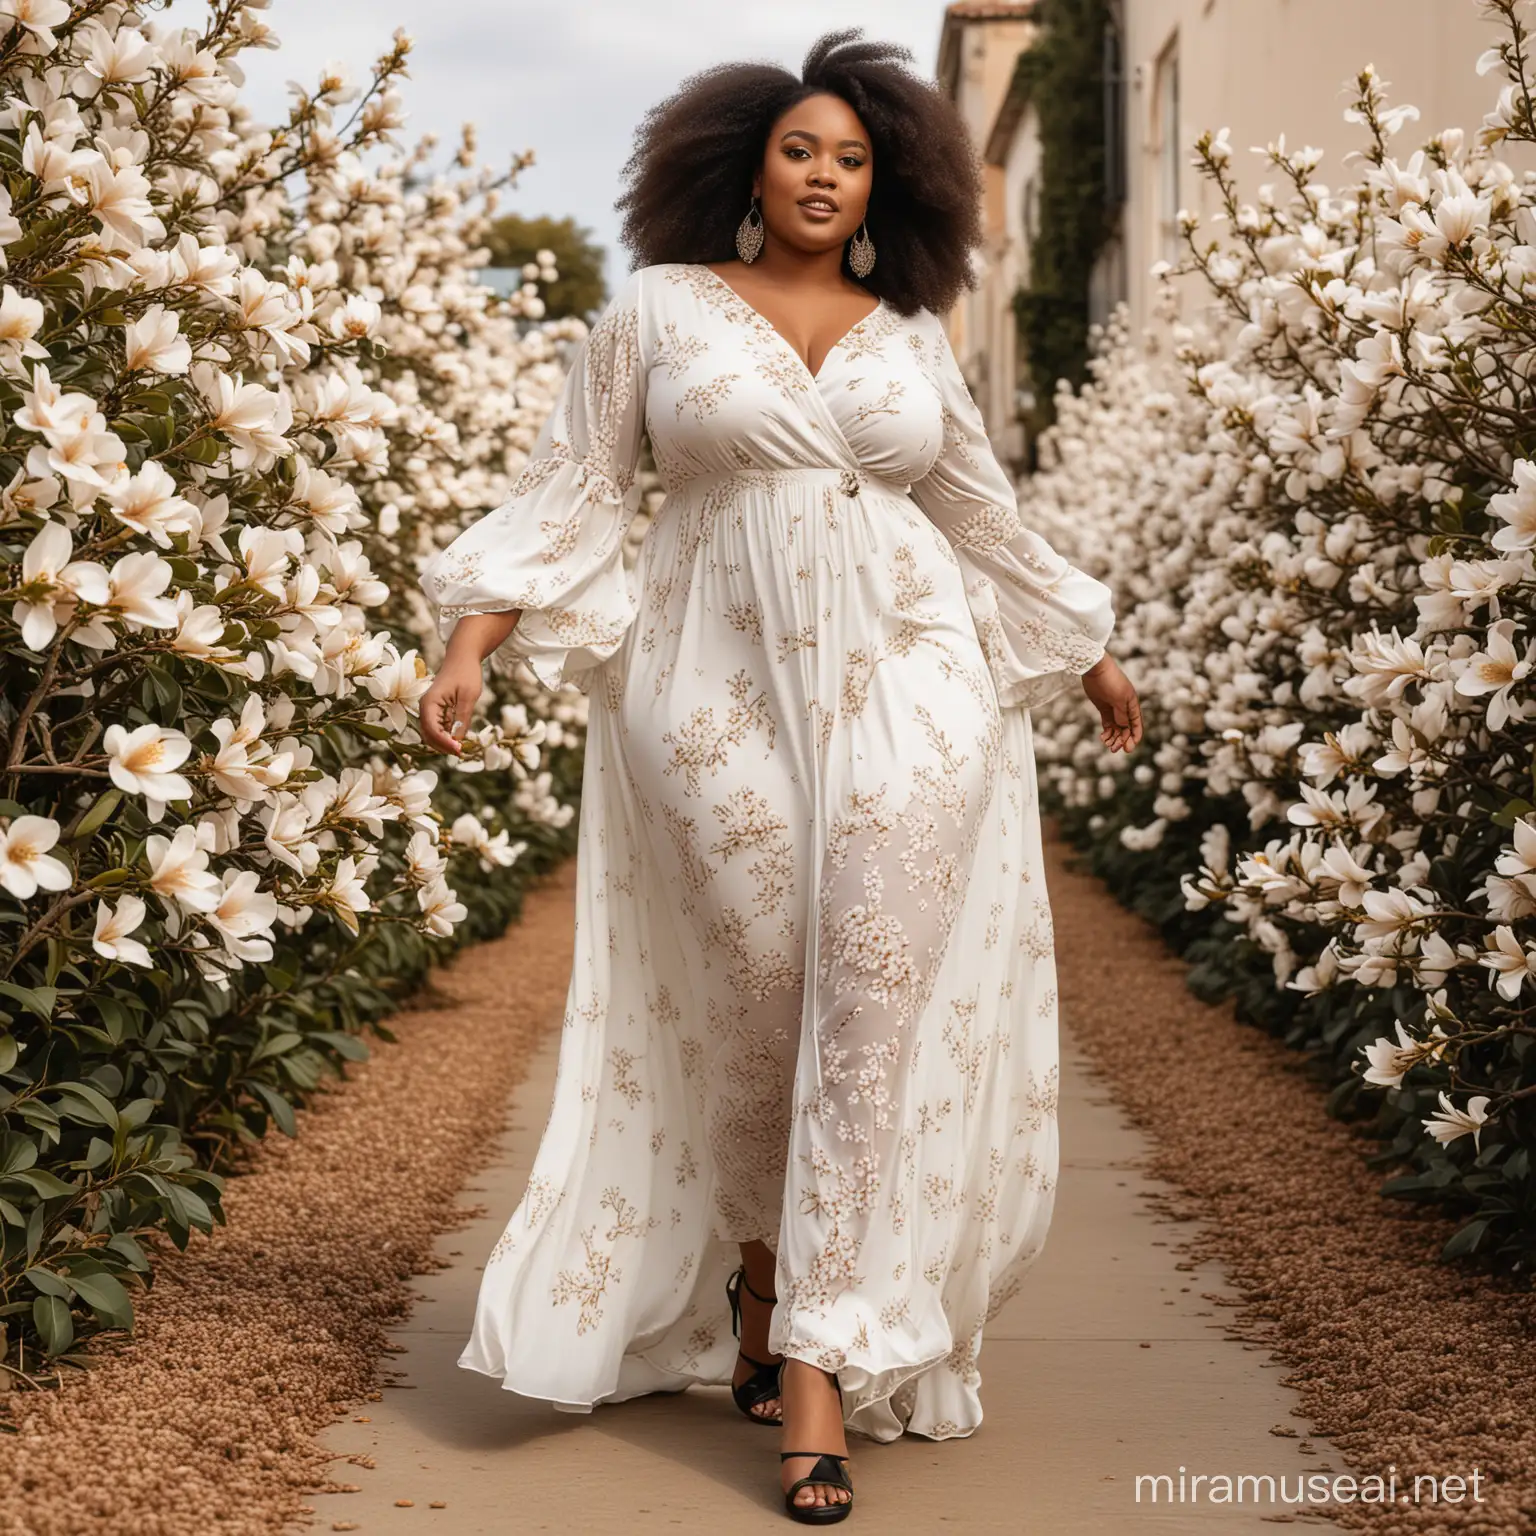 Graceful African Plus Size Woman in OffWhite Maxi Dress with Platinum Magnolia Trail